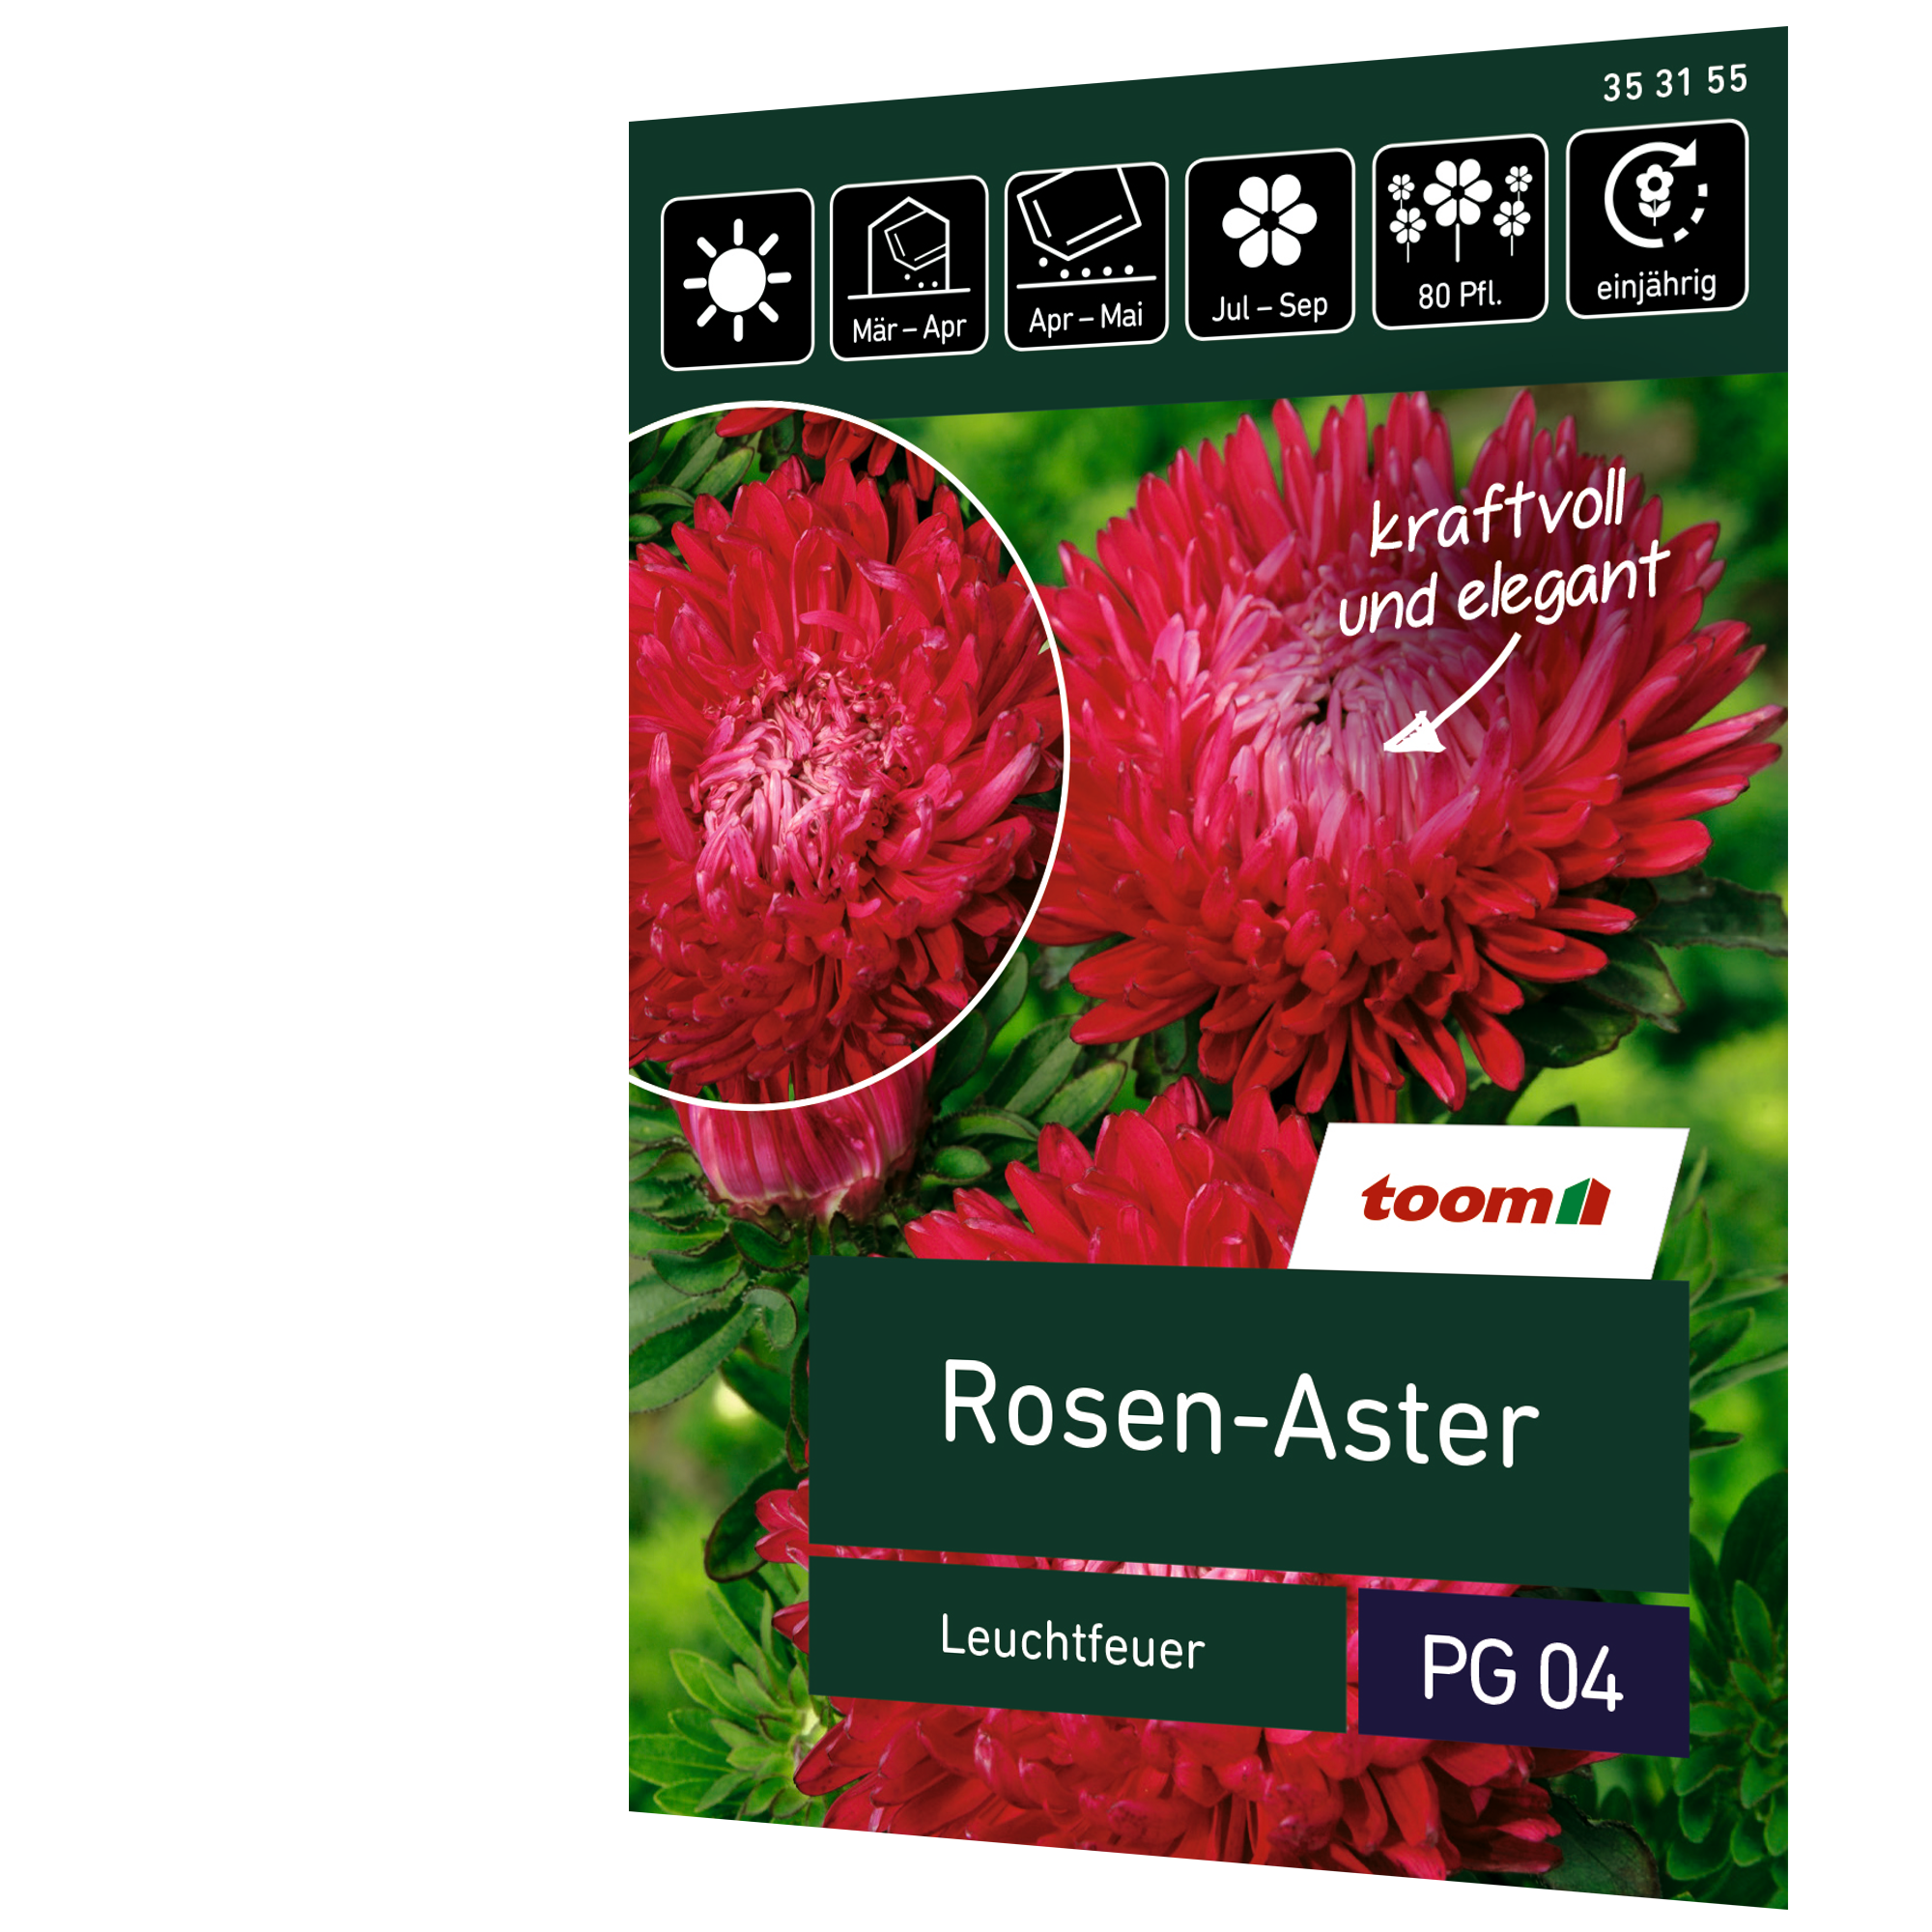 Rosen-Aster 'Leuchtfeuer' + product picture